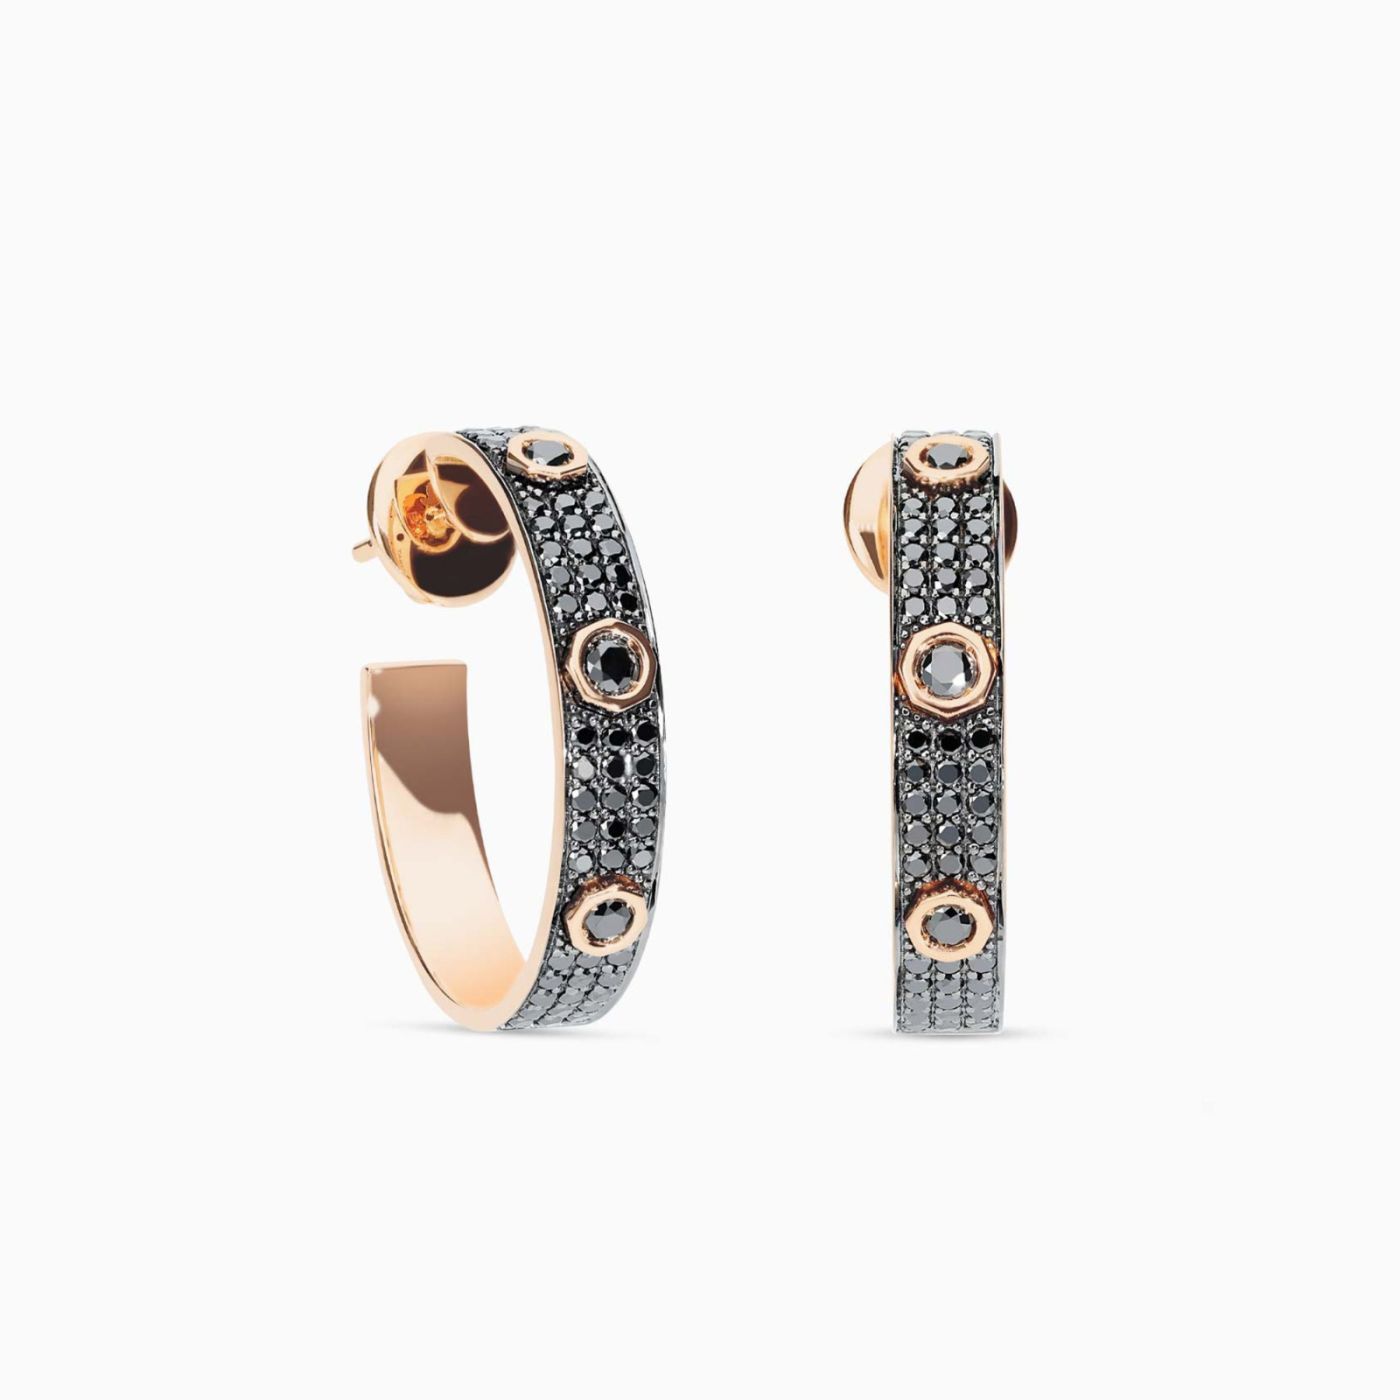 Rose gold earrings with black diamond´s pave